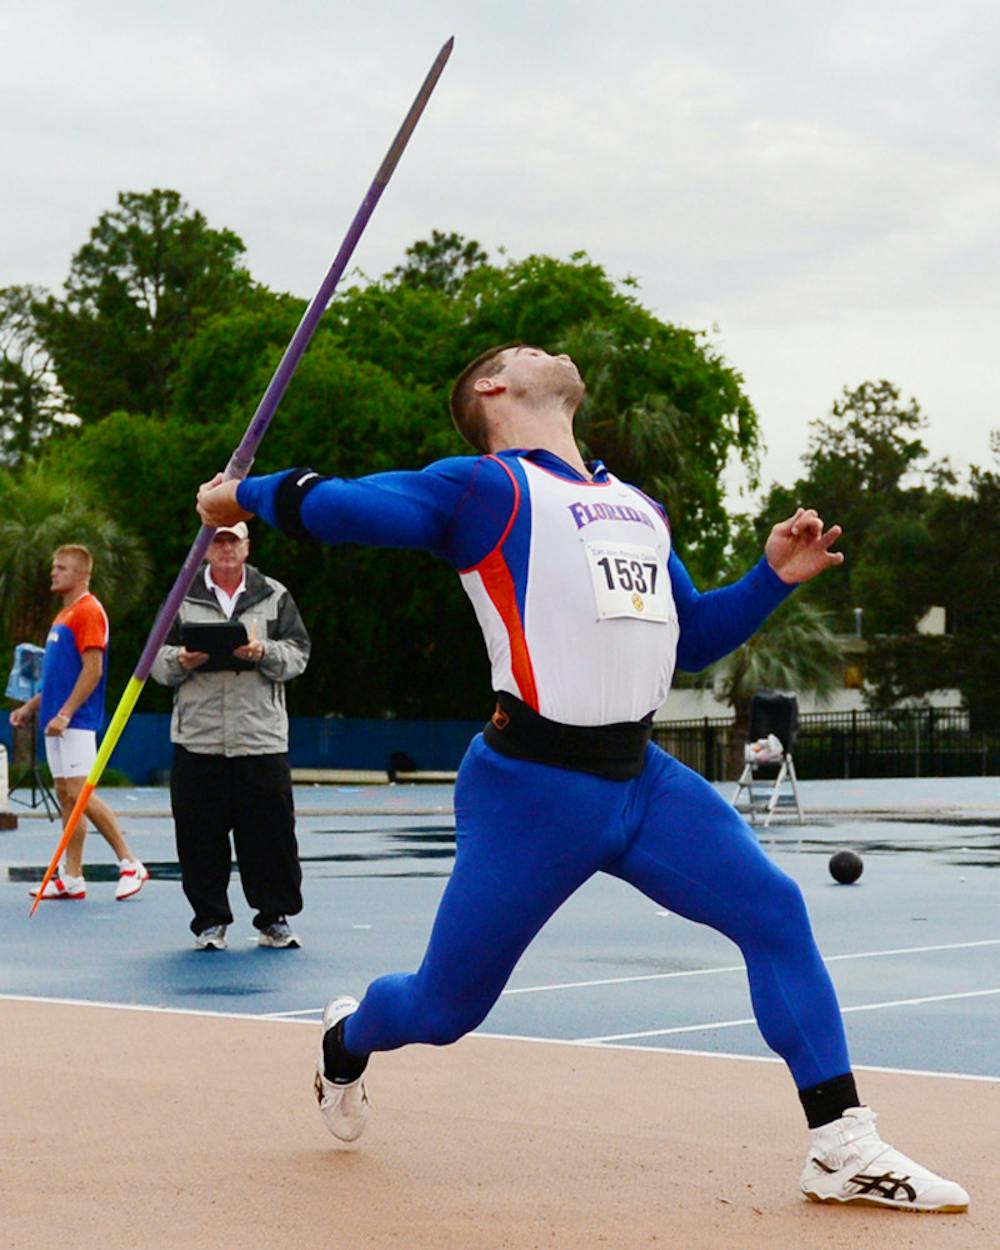 <p>Stipe Zunic throws during the Tom Jones Memorial Classic on April 21, 2012. He set a career-best shot-put mark of 18.57 meters on Saturday.</p>